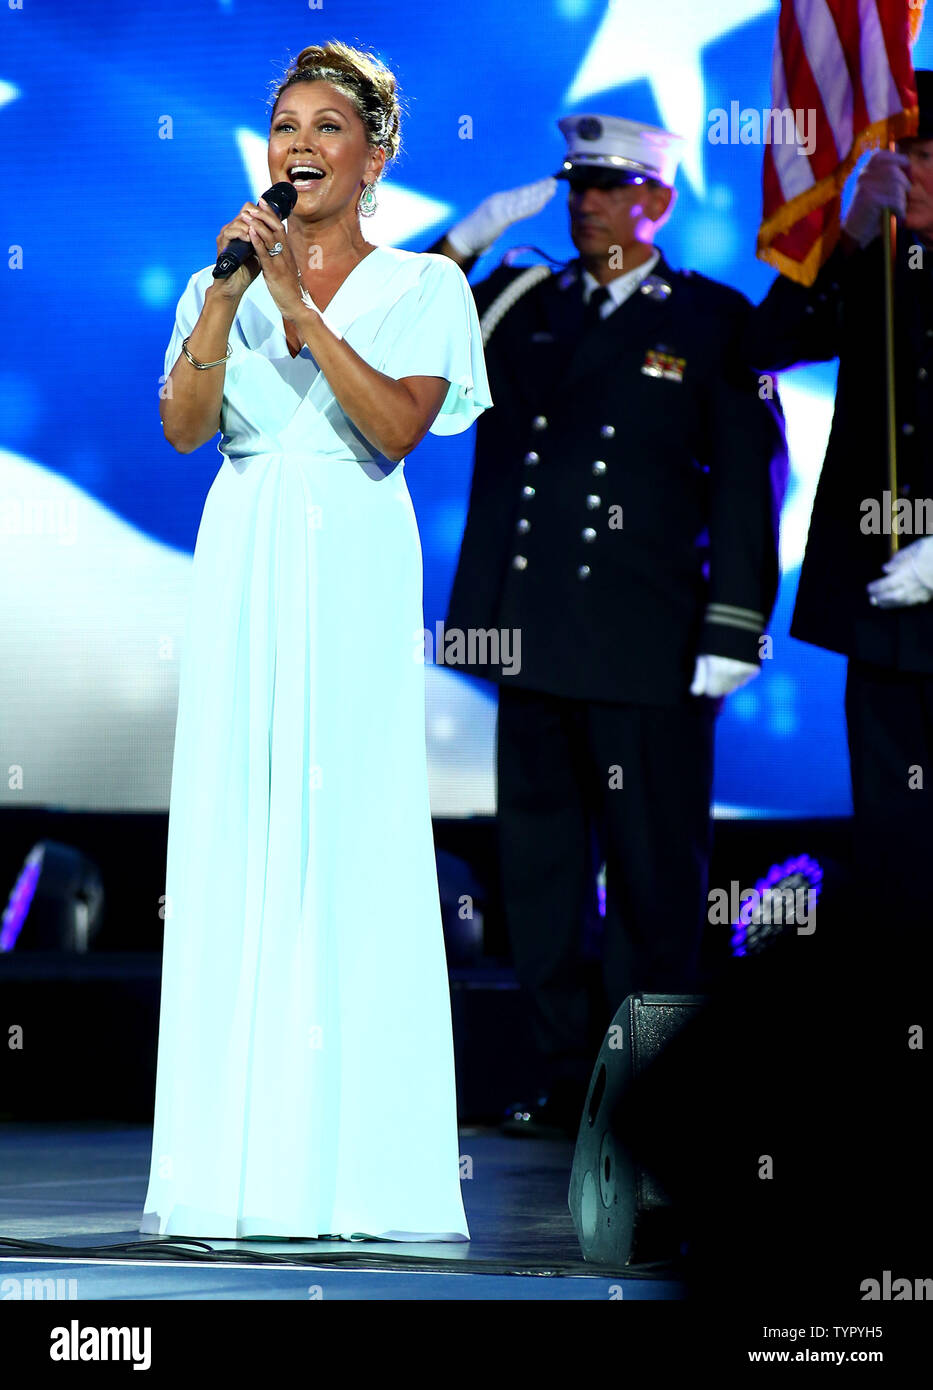 Vanessa Williams performs during the Opening Night Ceremony at the US Open Tennis Championships at the USTA Billie Jean King National Tennis Center in New York City on August 31, 2015.     UPI/Monika Graff Stock Photo